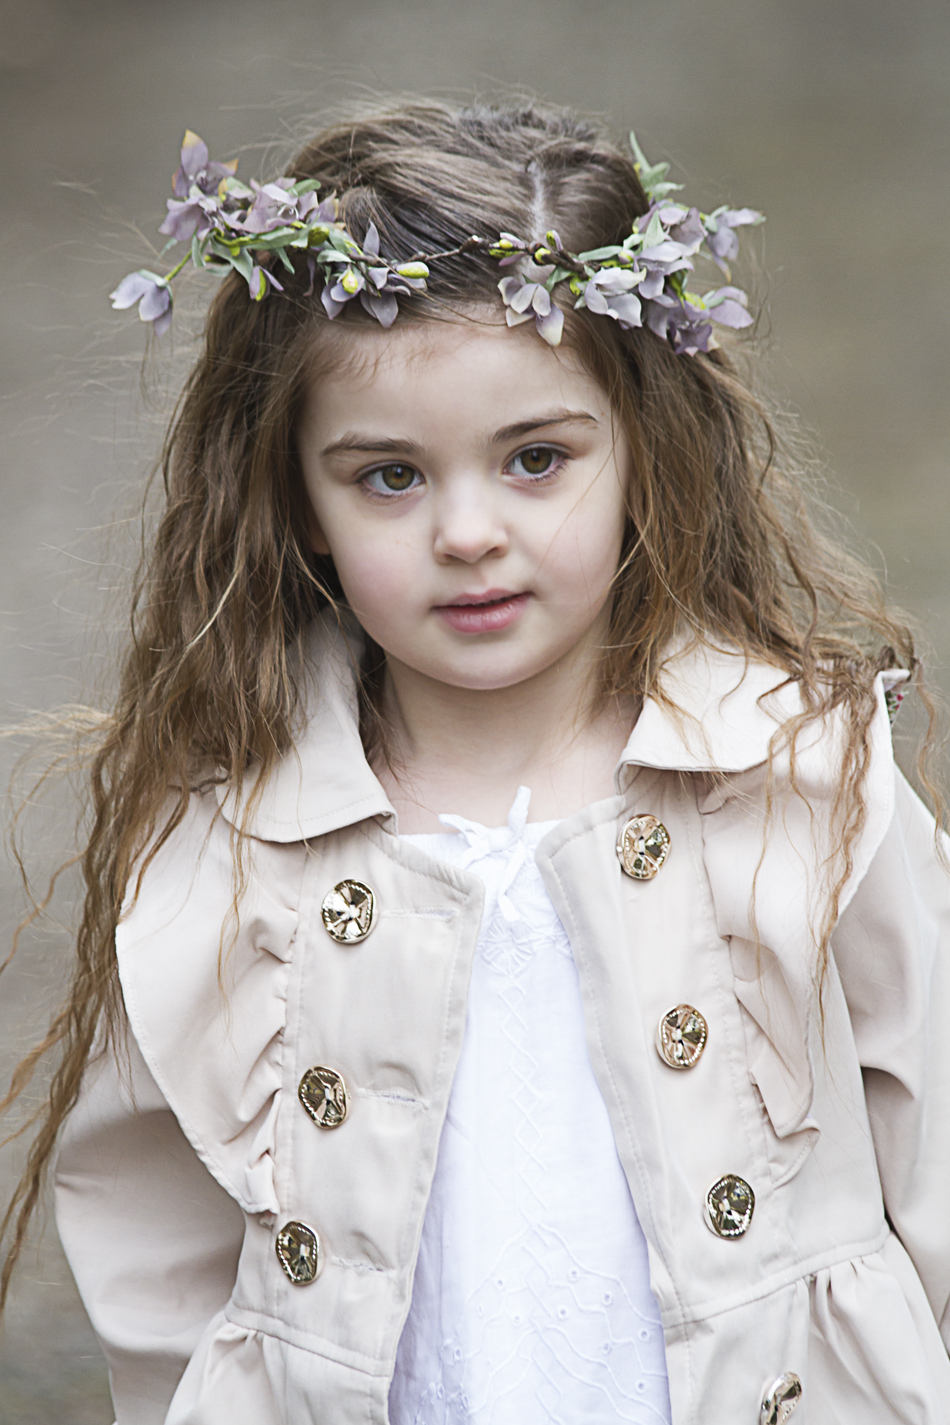 Young child with floral headband